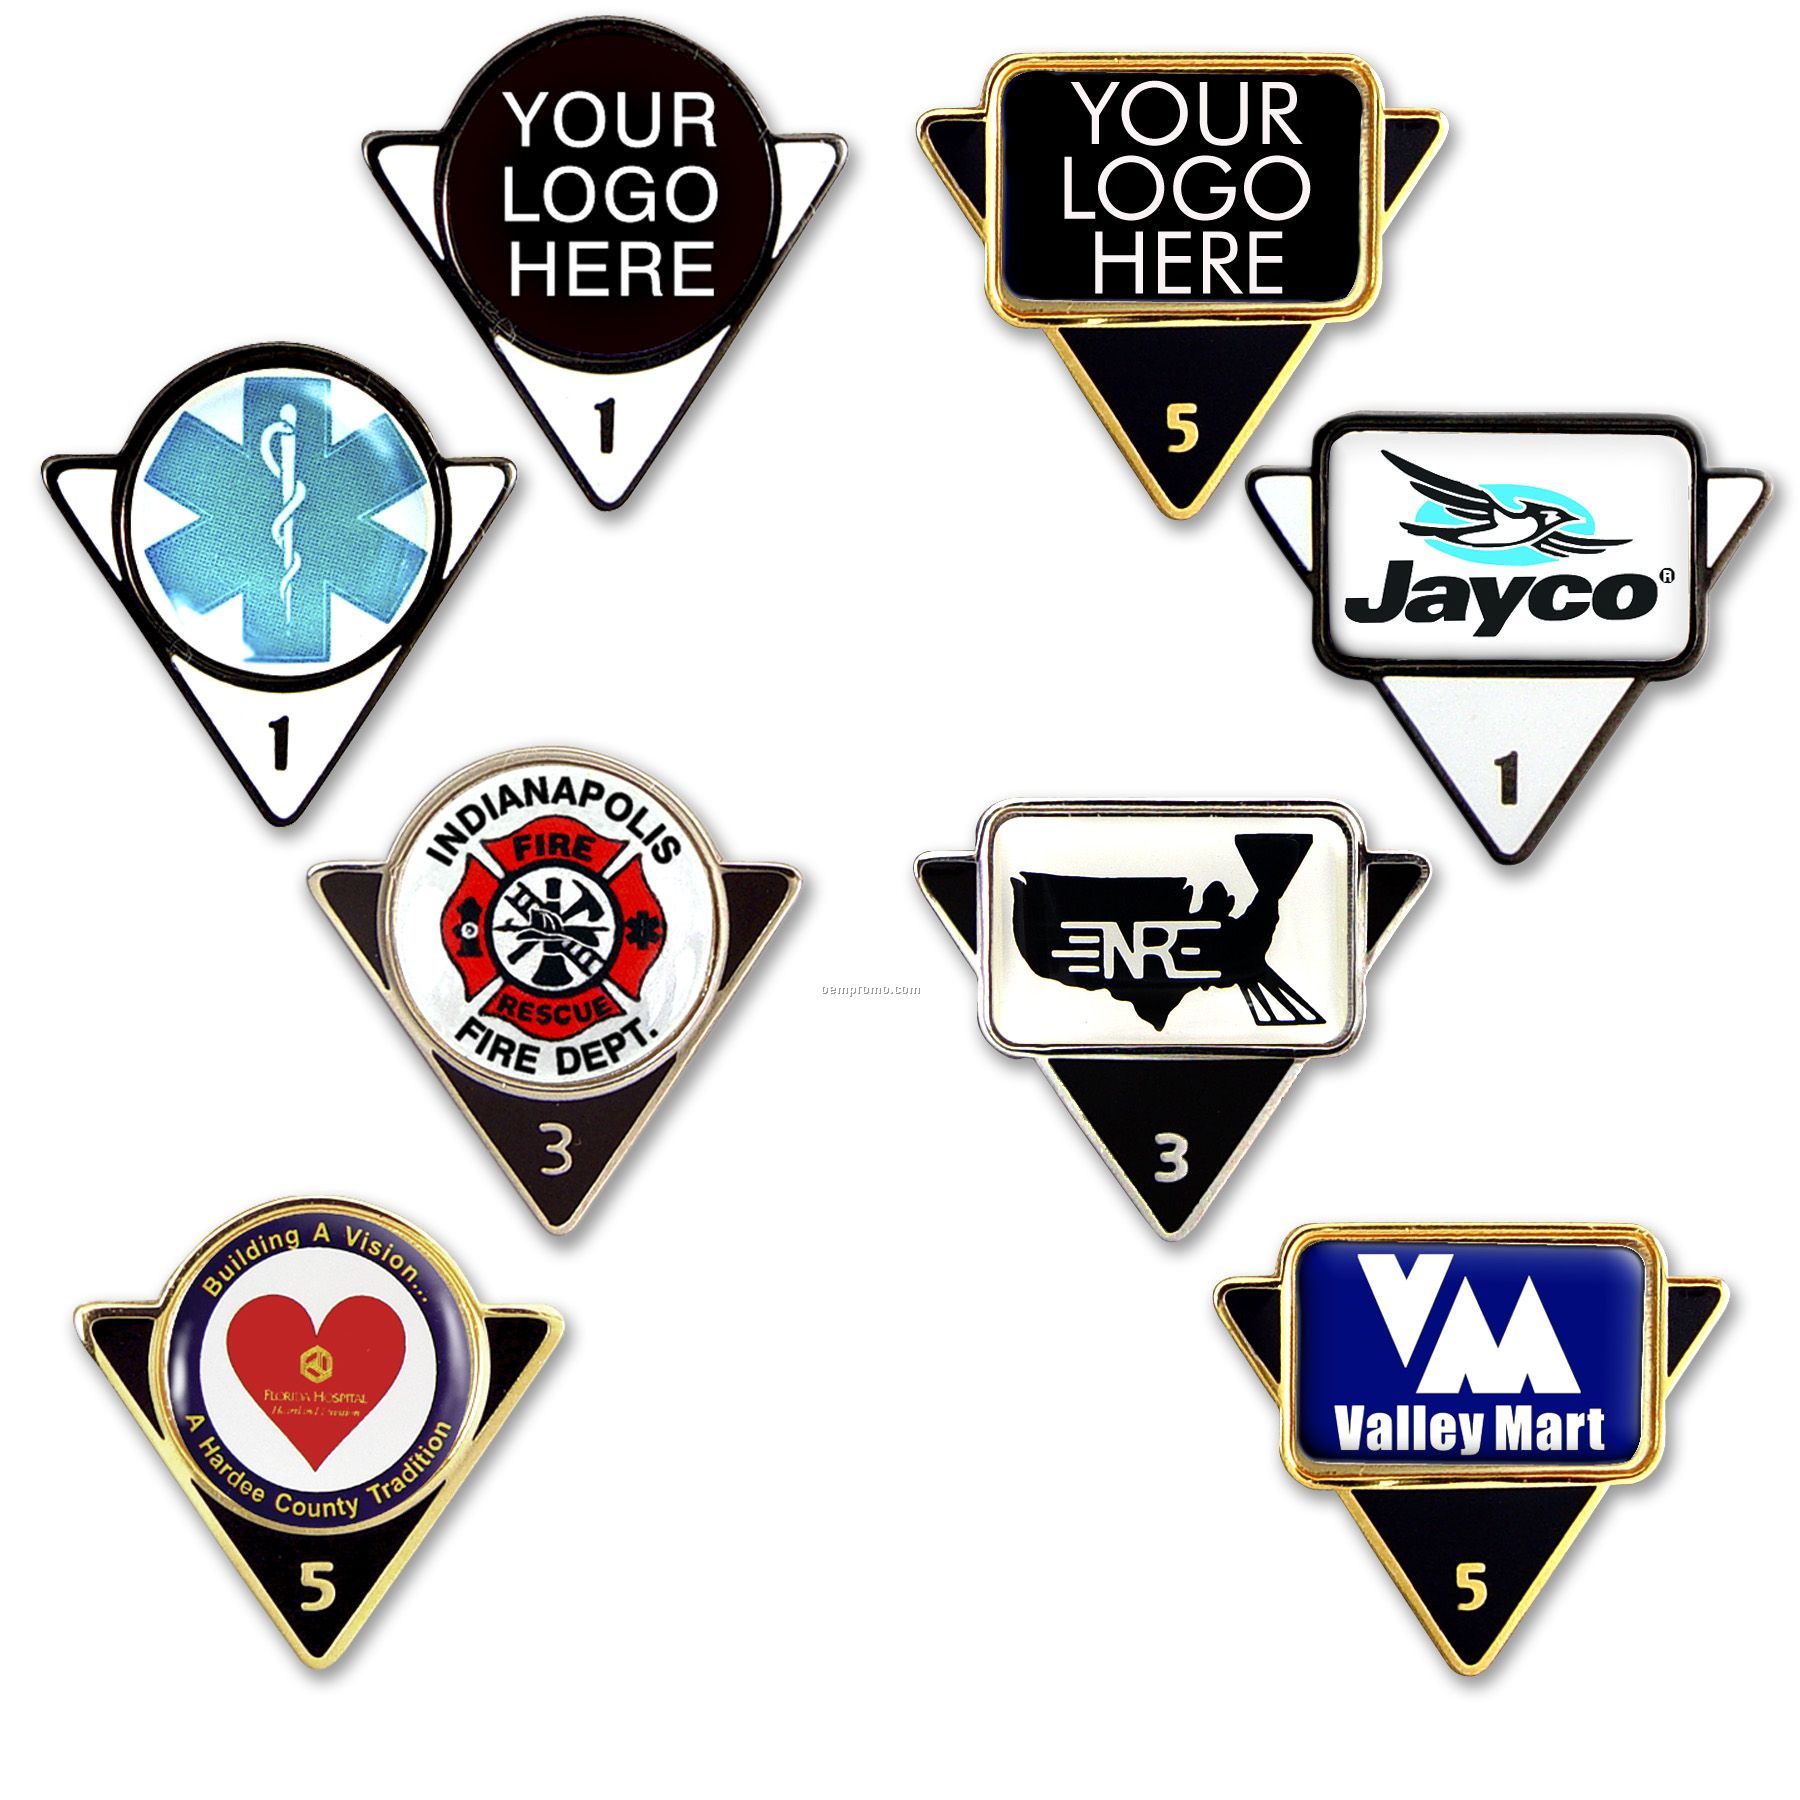 Years Of Service Lapel Pin - Stock Shape With Numeral & Enamel Color Fill